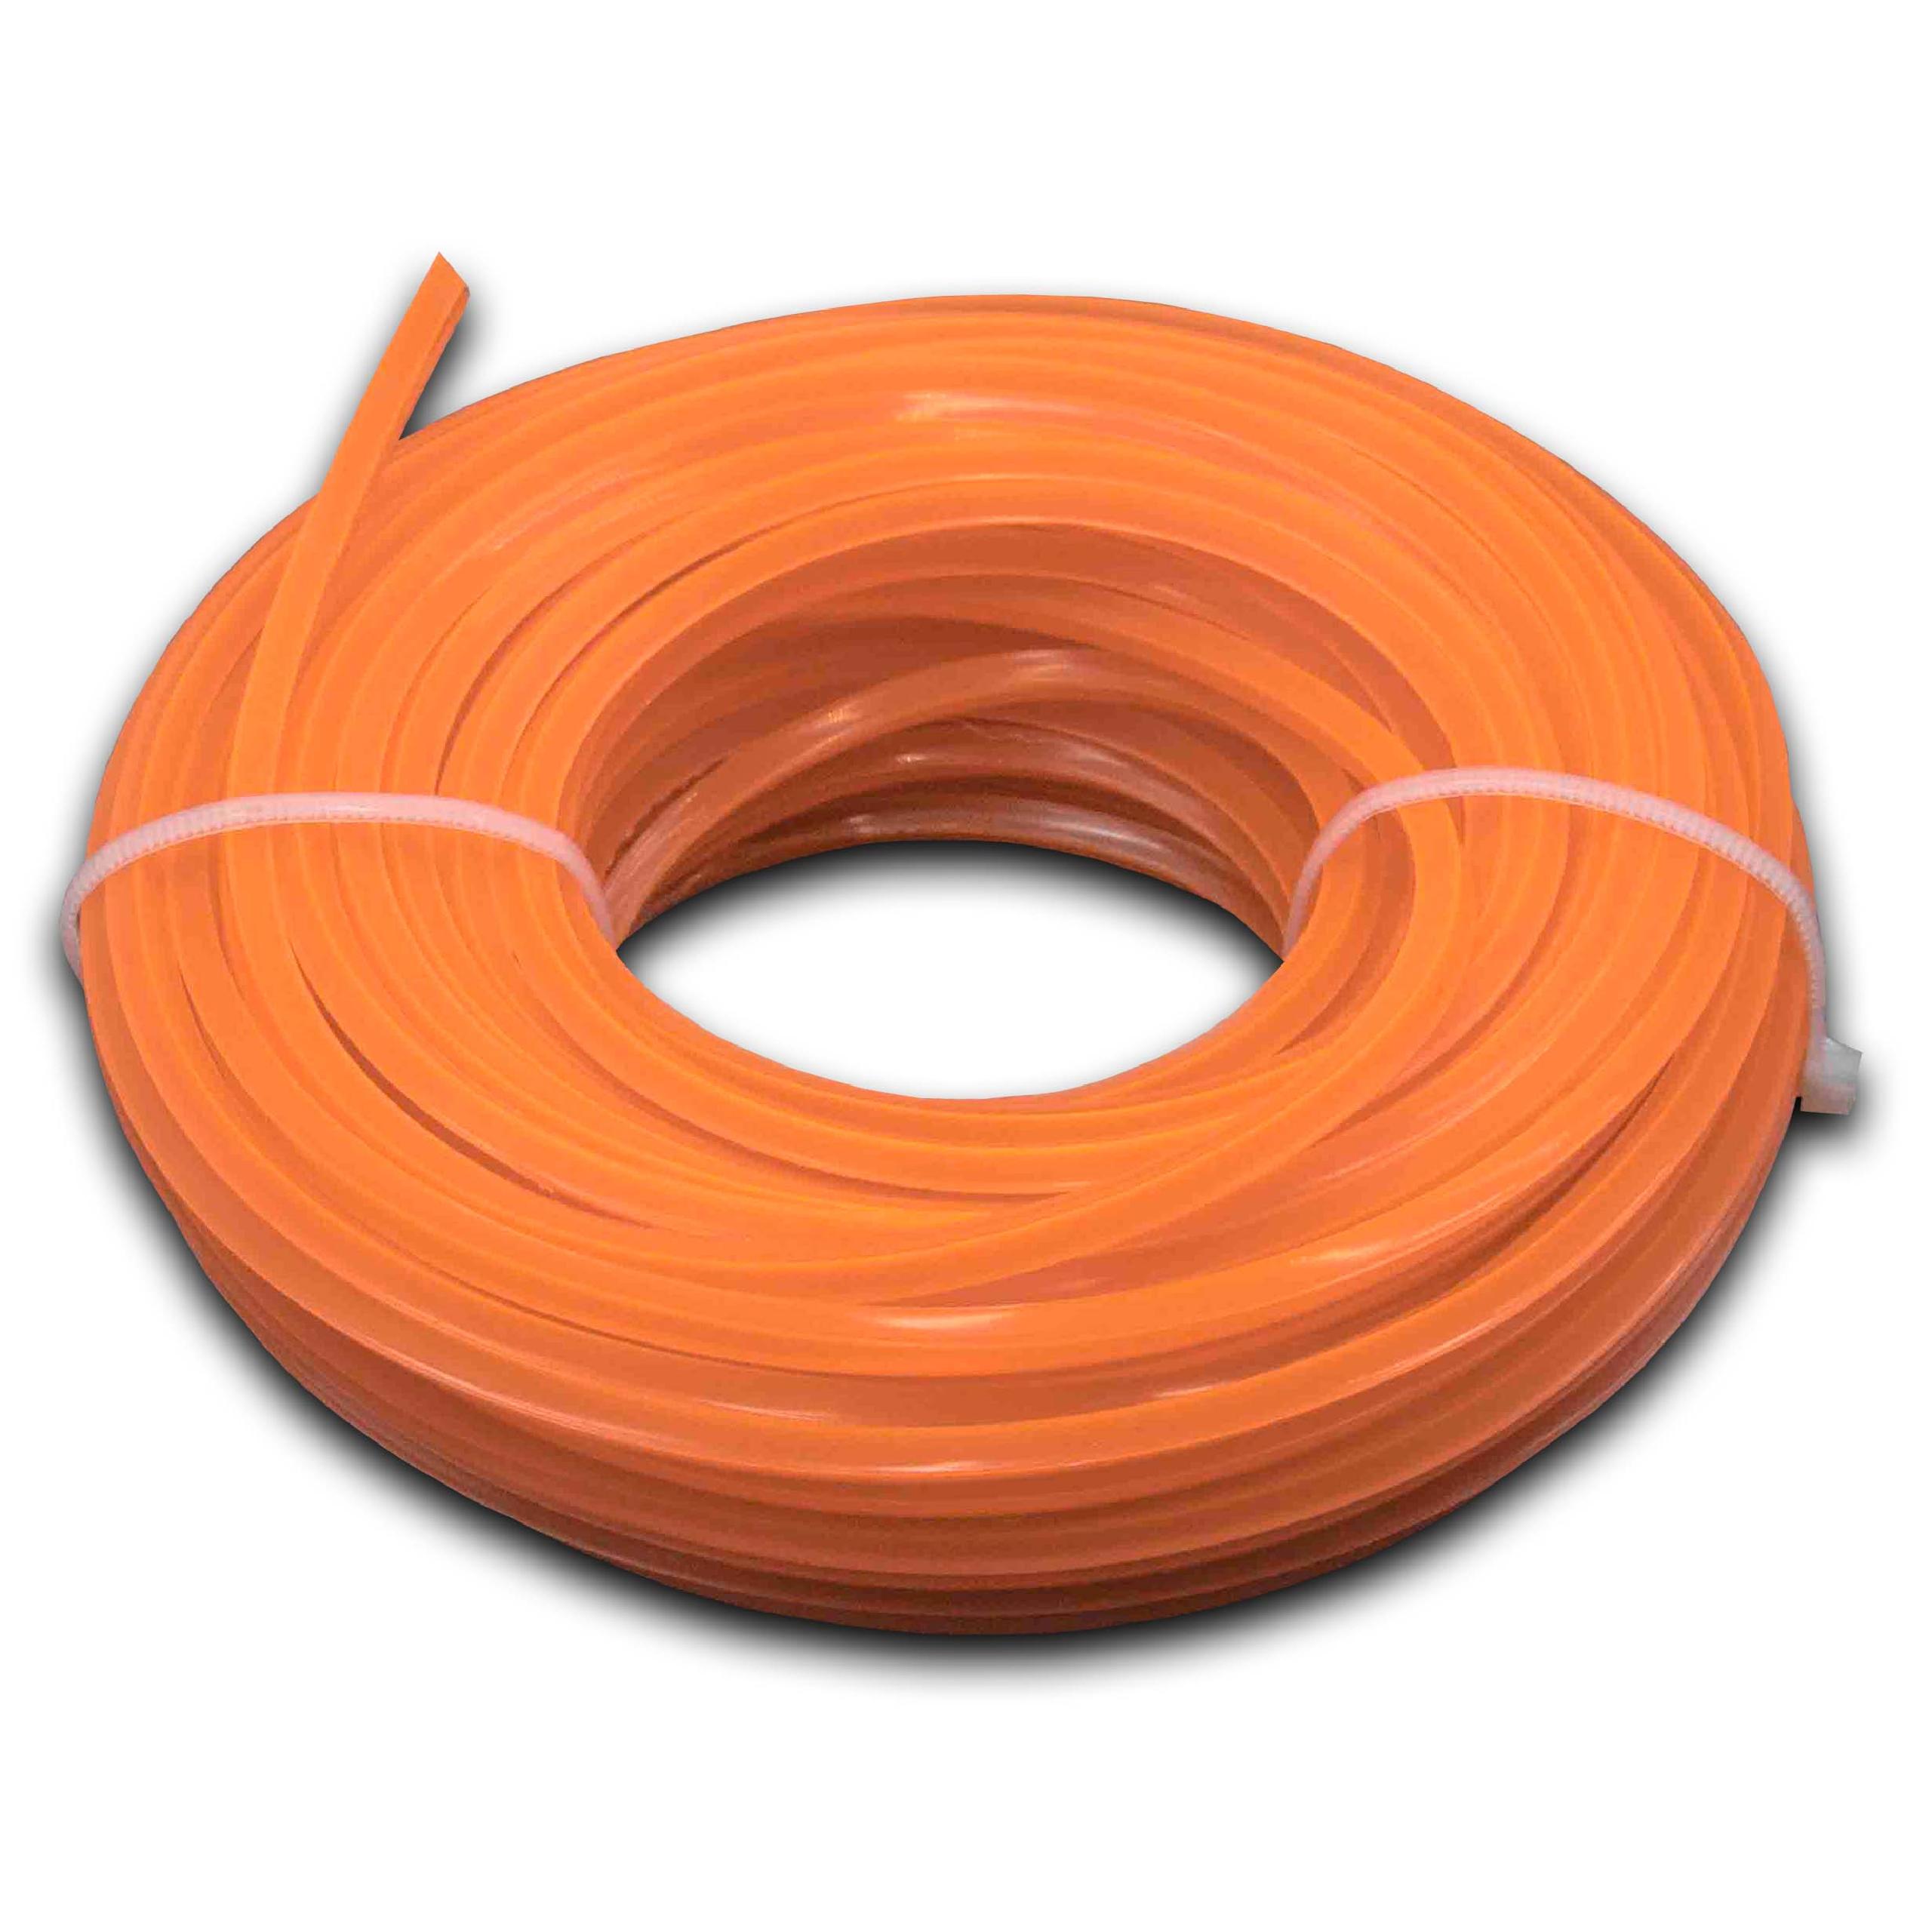 Line suitable for Bosch Makita Lawn Mower, Grass Trimmer - Trimmer Line Orange, 3 mm x 15 m, Square